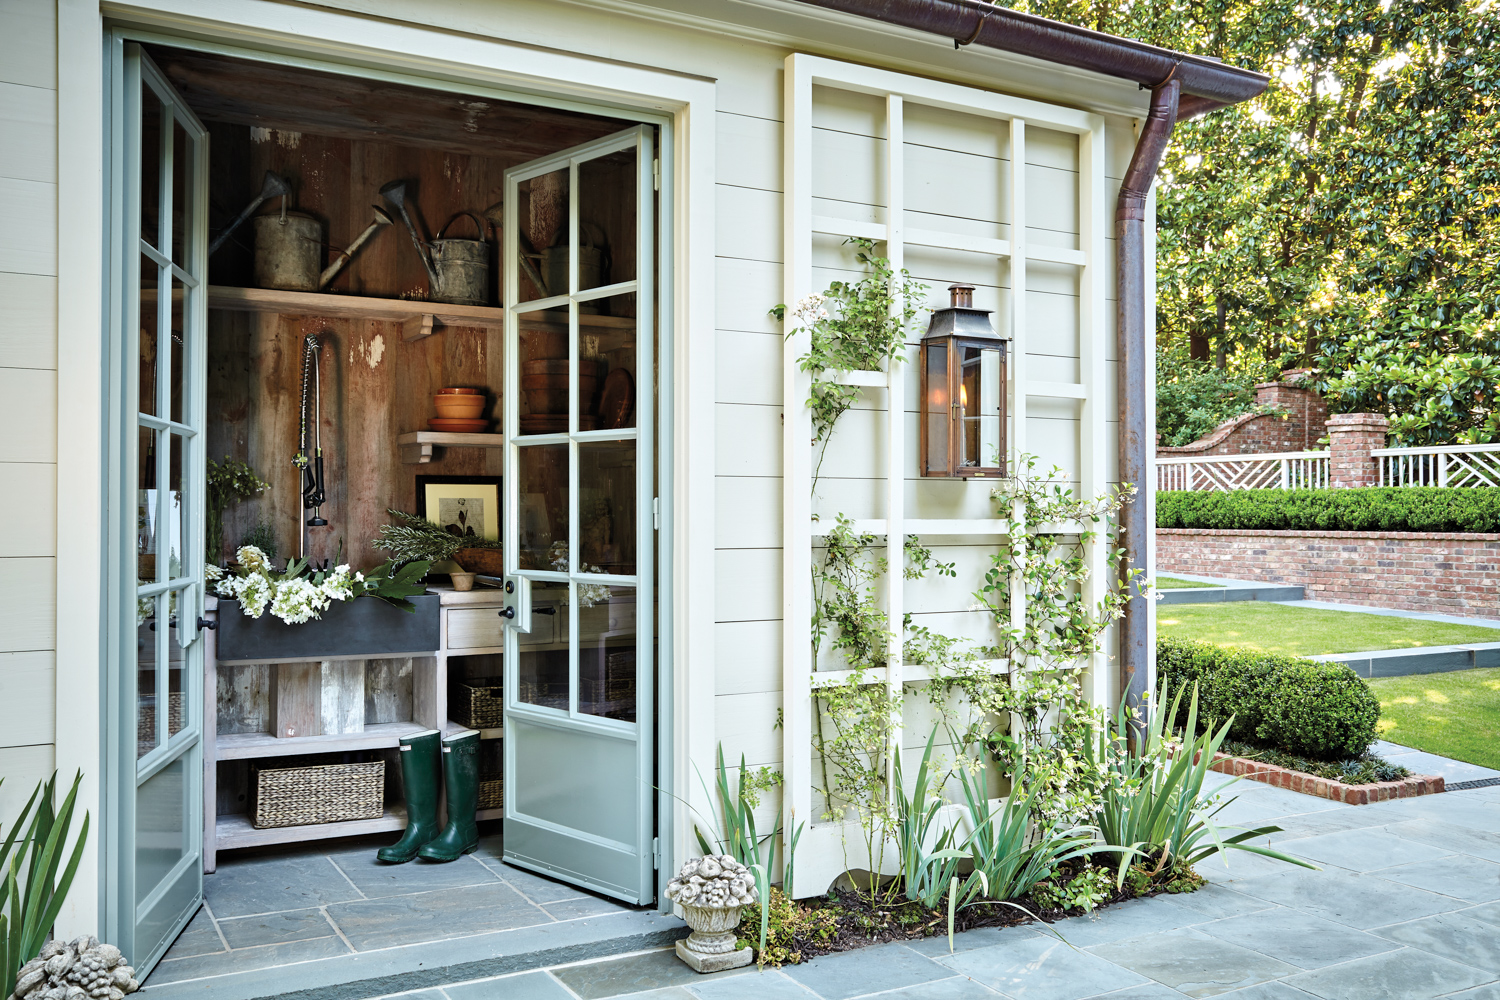 Swoon Over This Pastoral Potting Shed In The Heart Of Atlanta